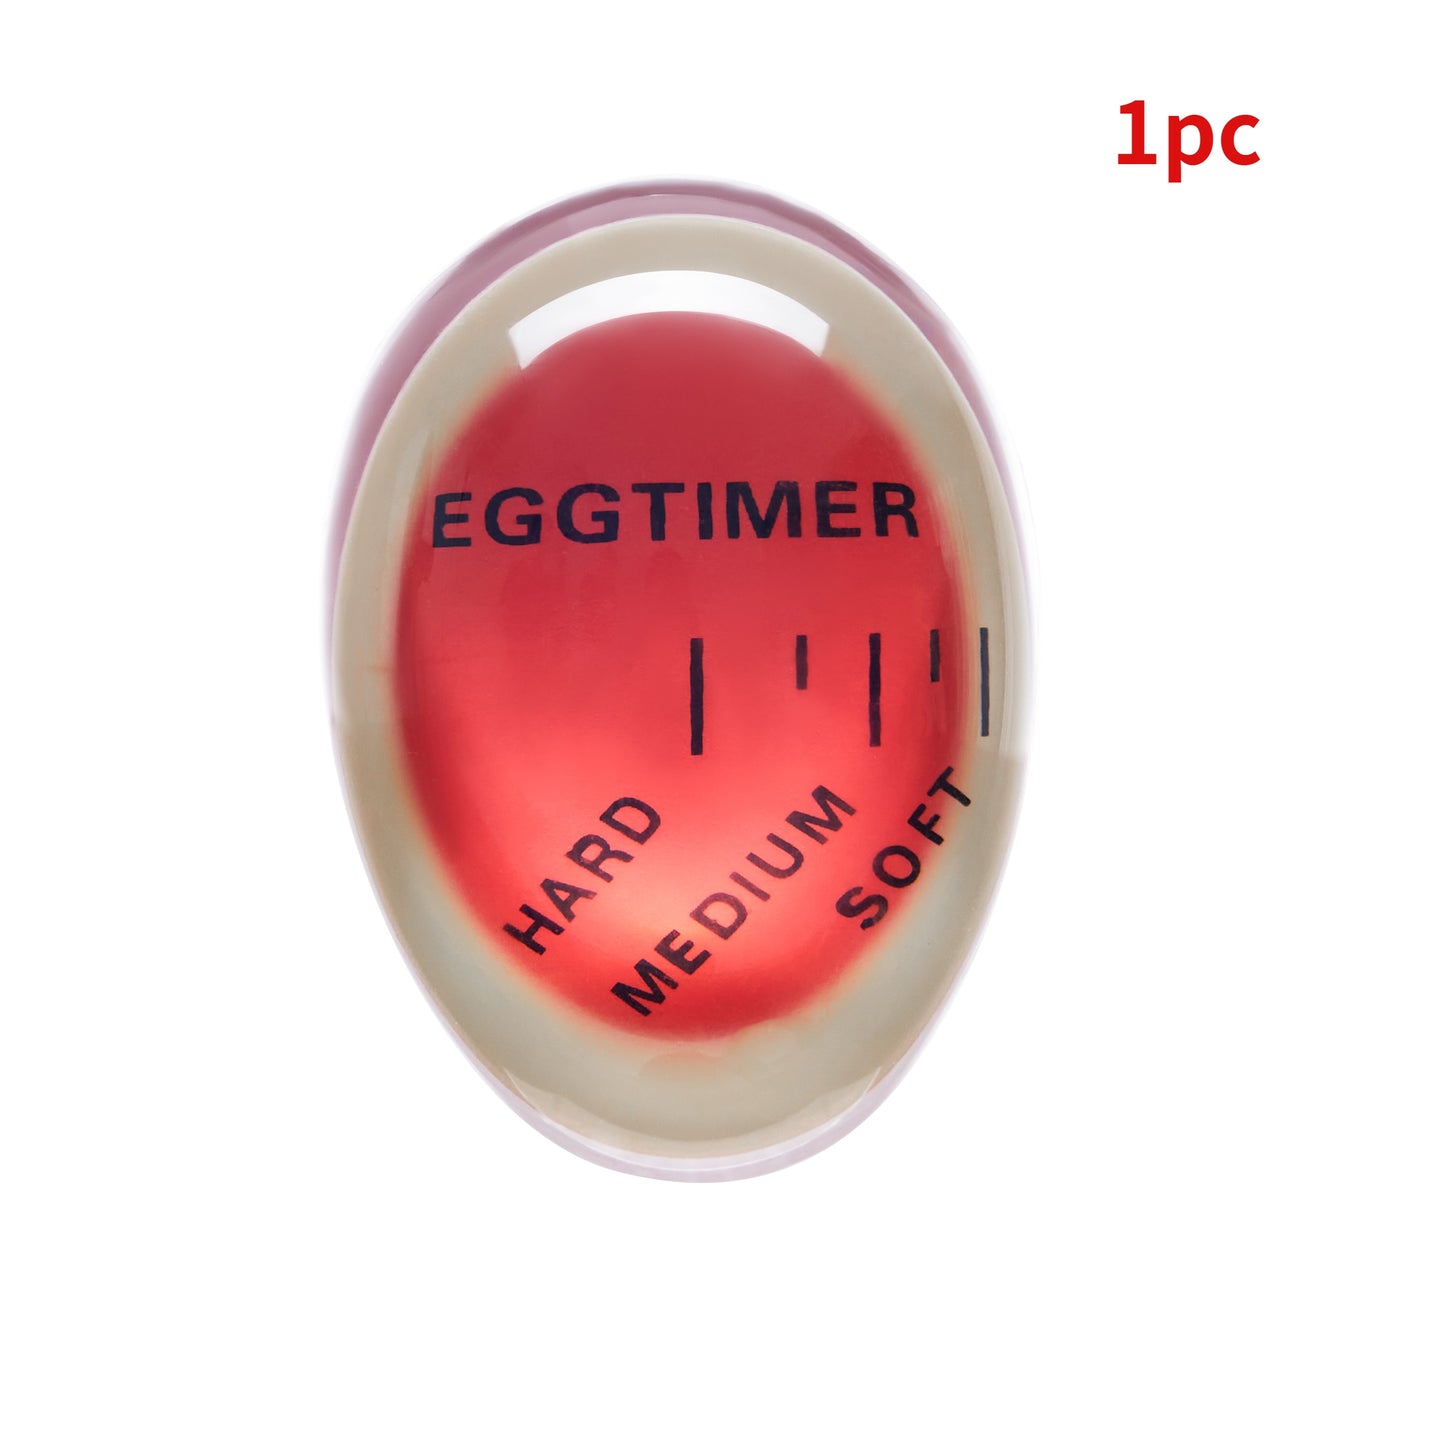 PERFECT BOILED EGG READING TOOL